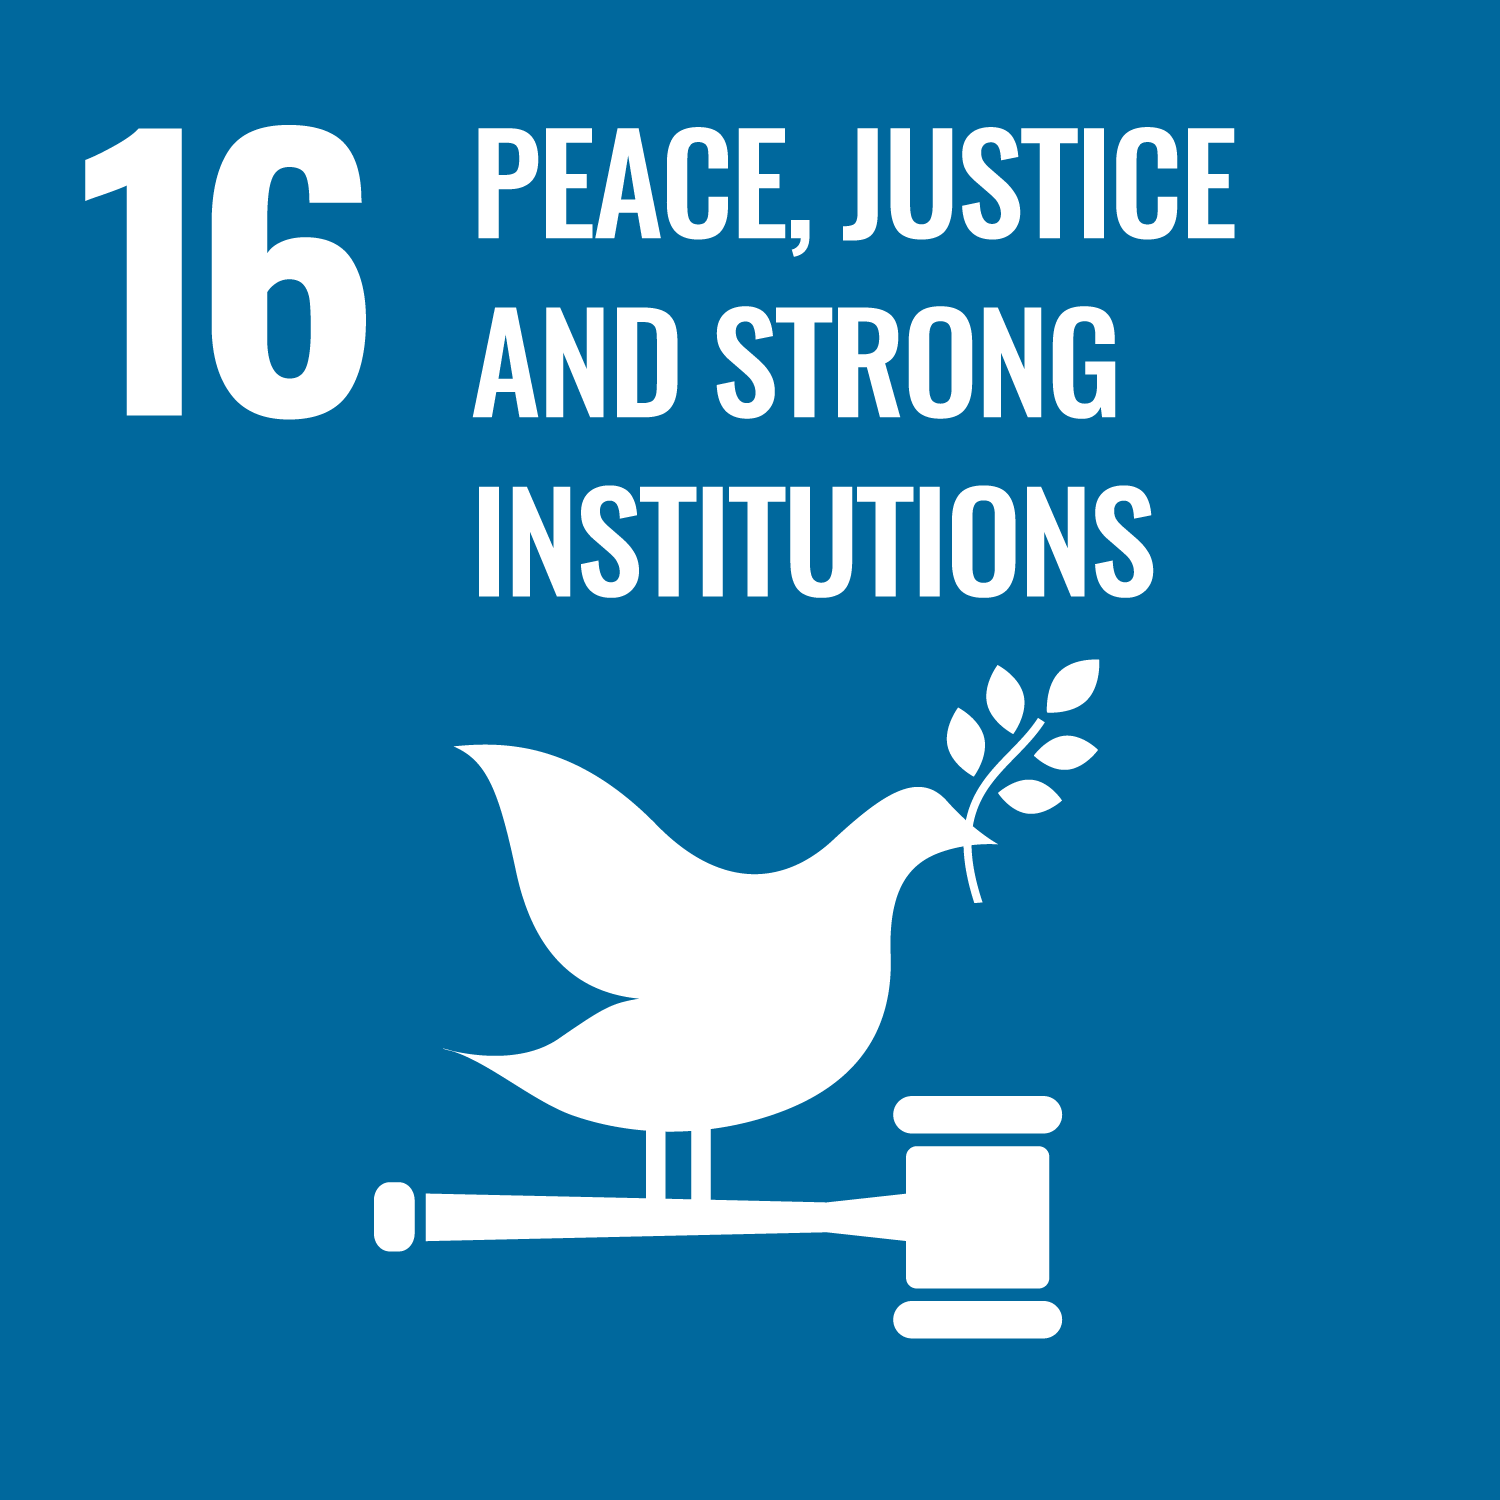 SDGs Goal 16: Promote just, peaceful and inclusive societies